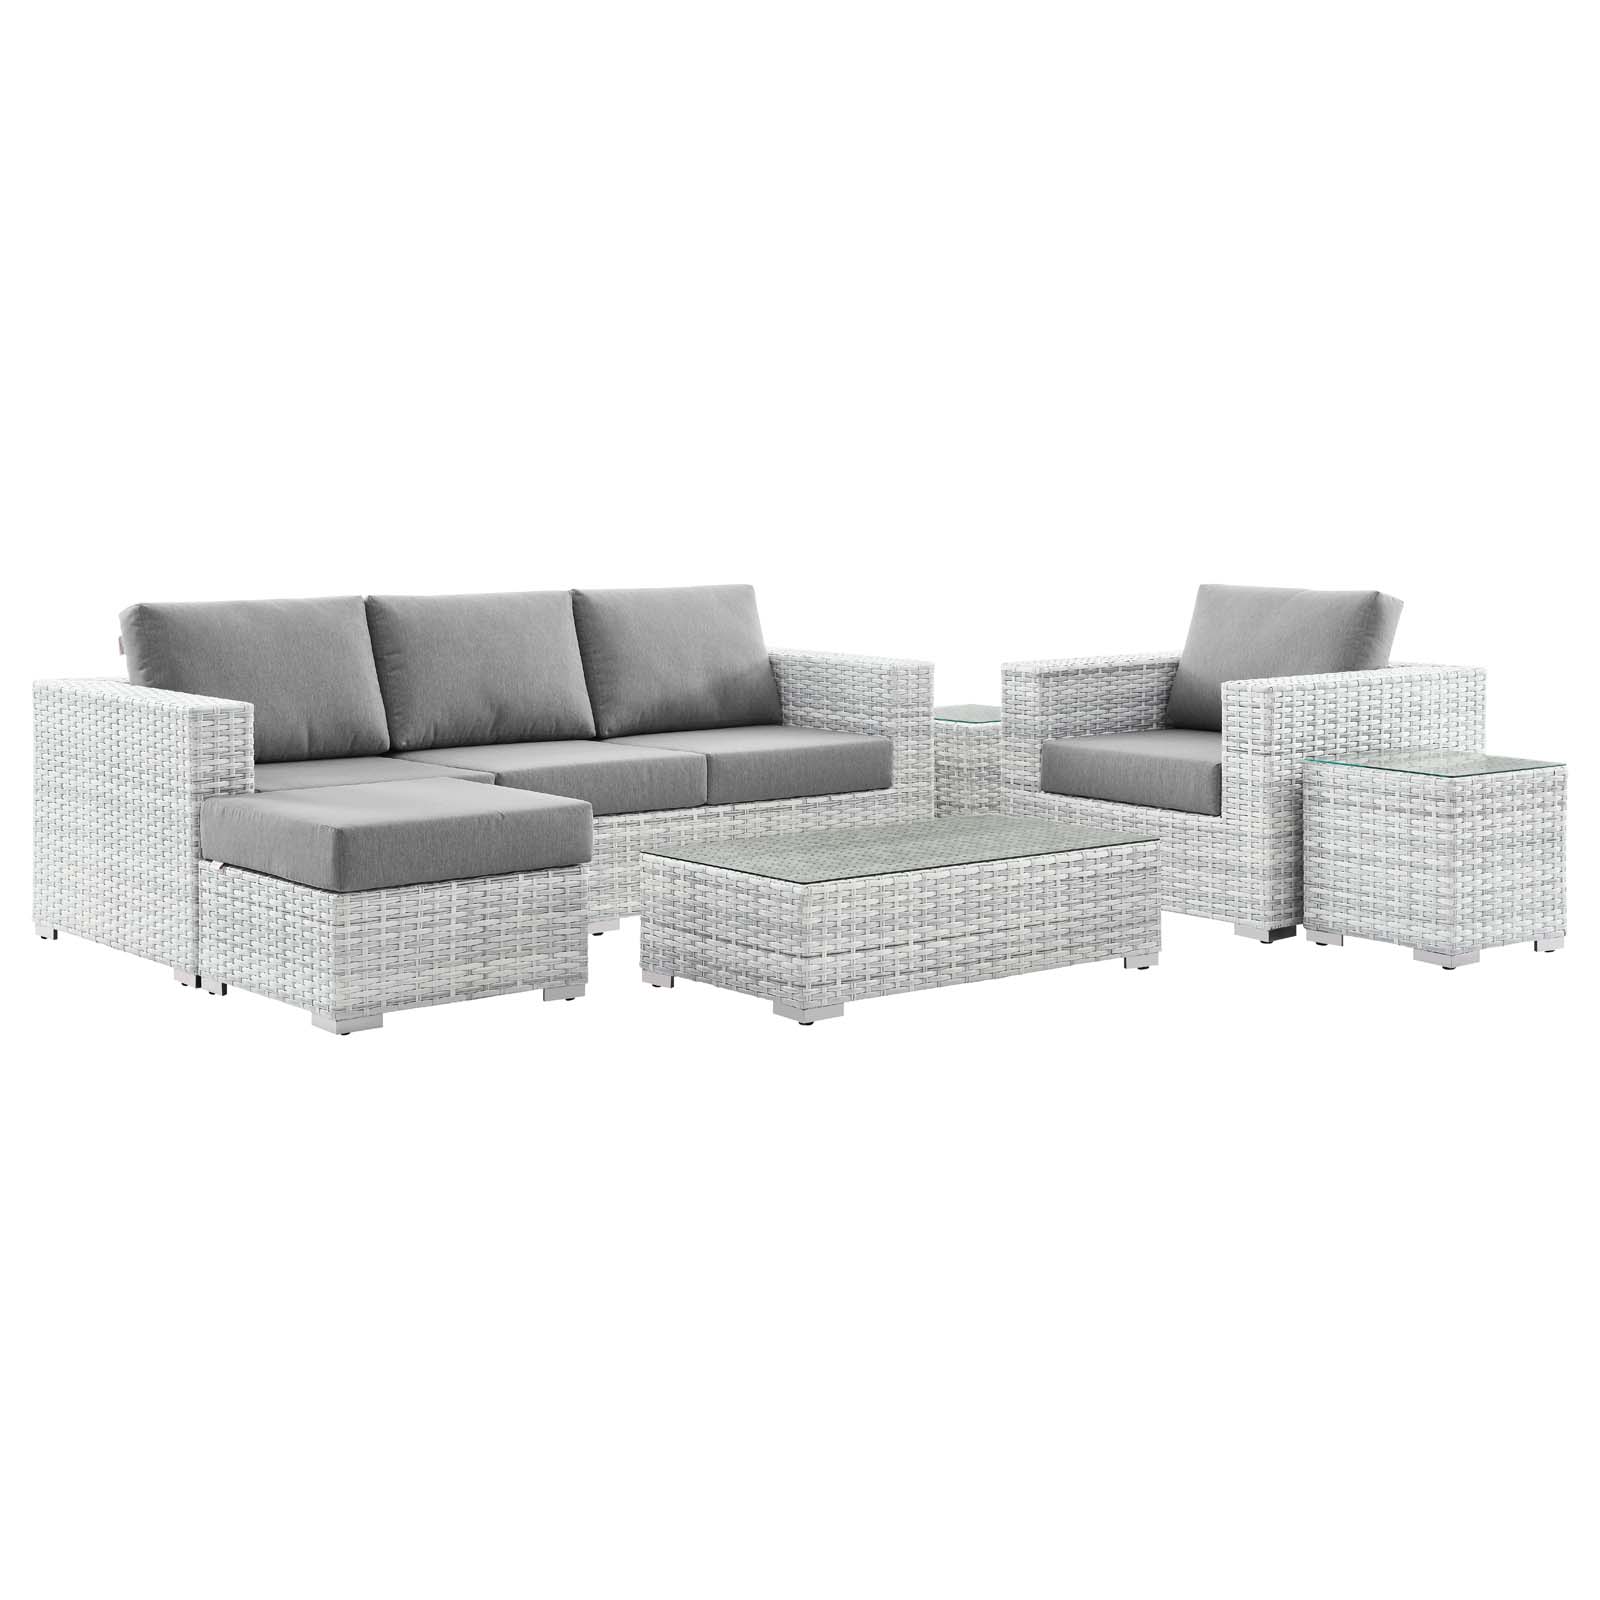 Lounge Sectional Sofa Chair Set, Rattan, Wicker, Grey Gray, Modern Contemporary Urban Design, Outdoor Patio Balcony Cafe Bistro Garden Furniture Hotel Hospitality - image 1 of 10